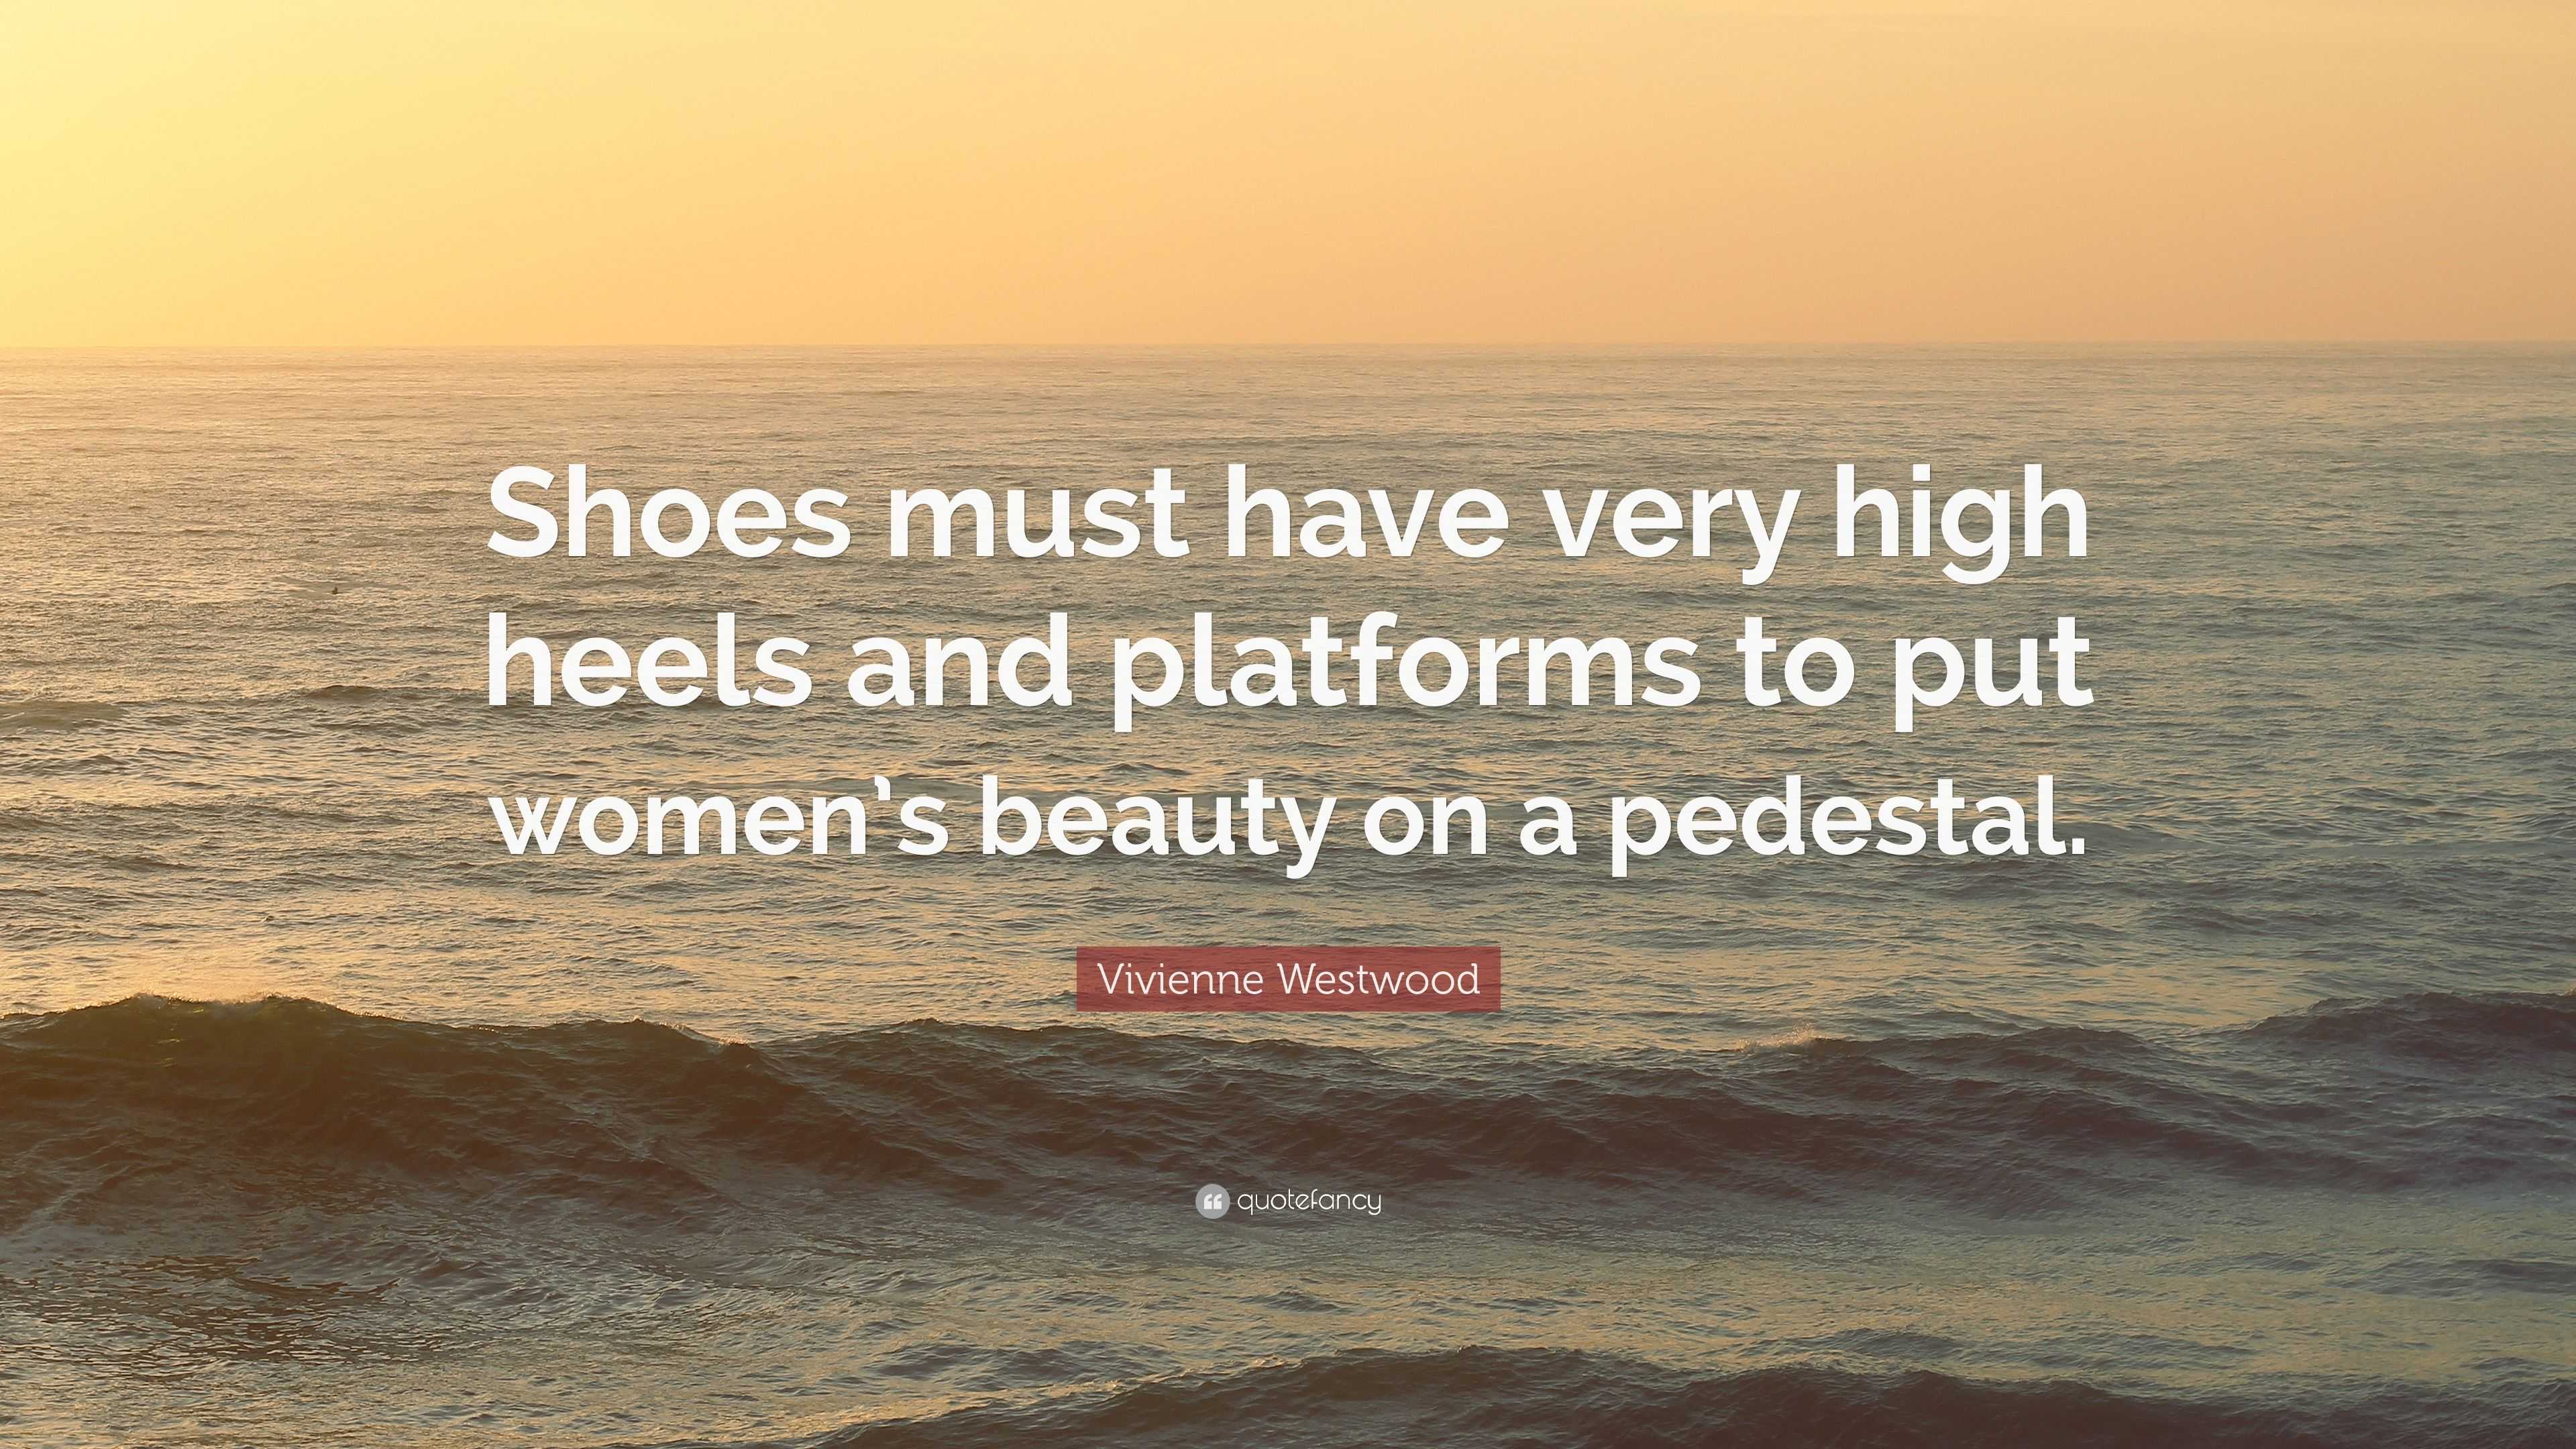 45 Funny and Famous Shoe Quotes About Shoes and Life (With Images)